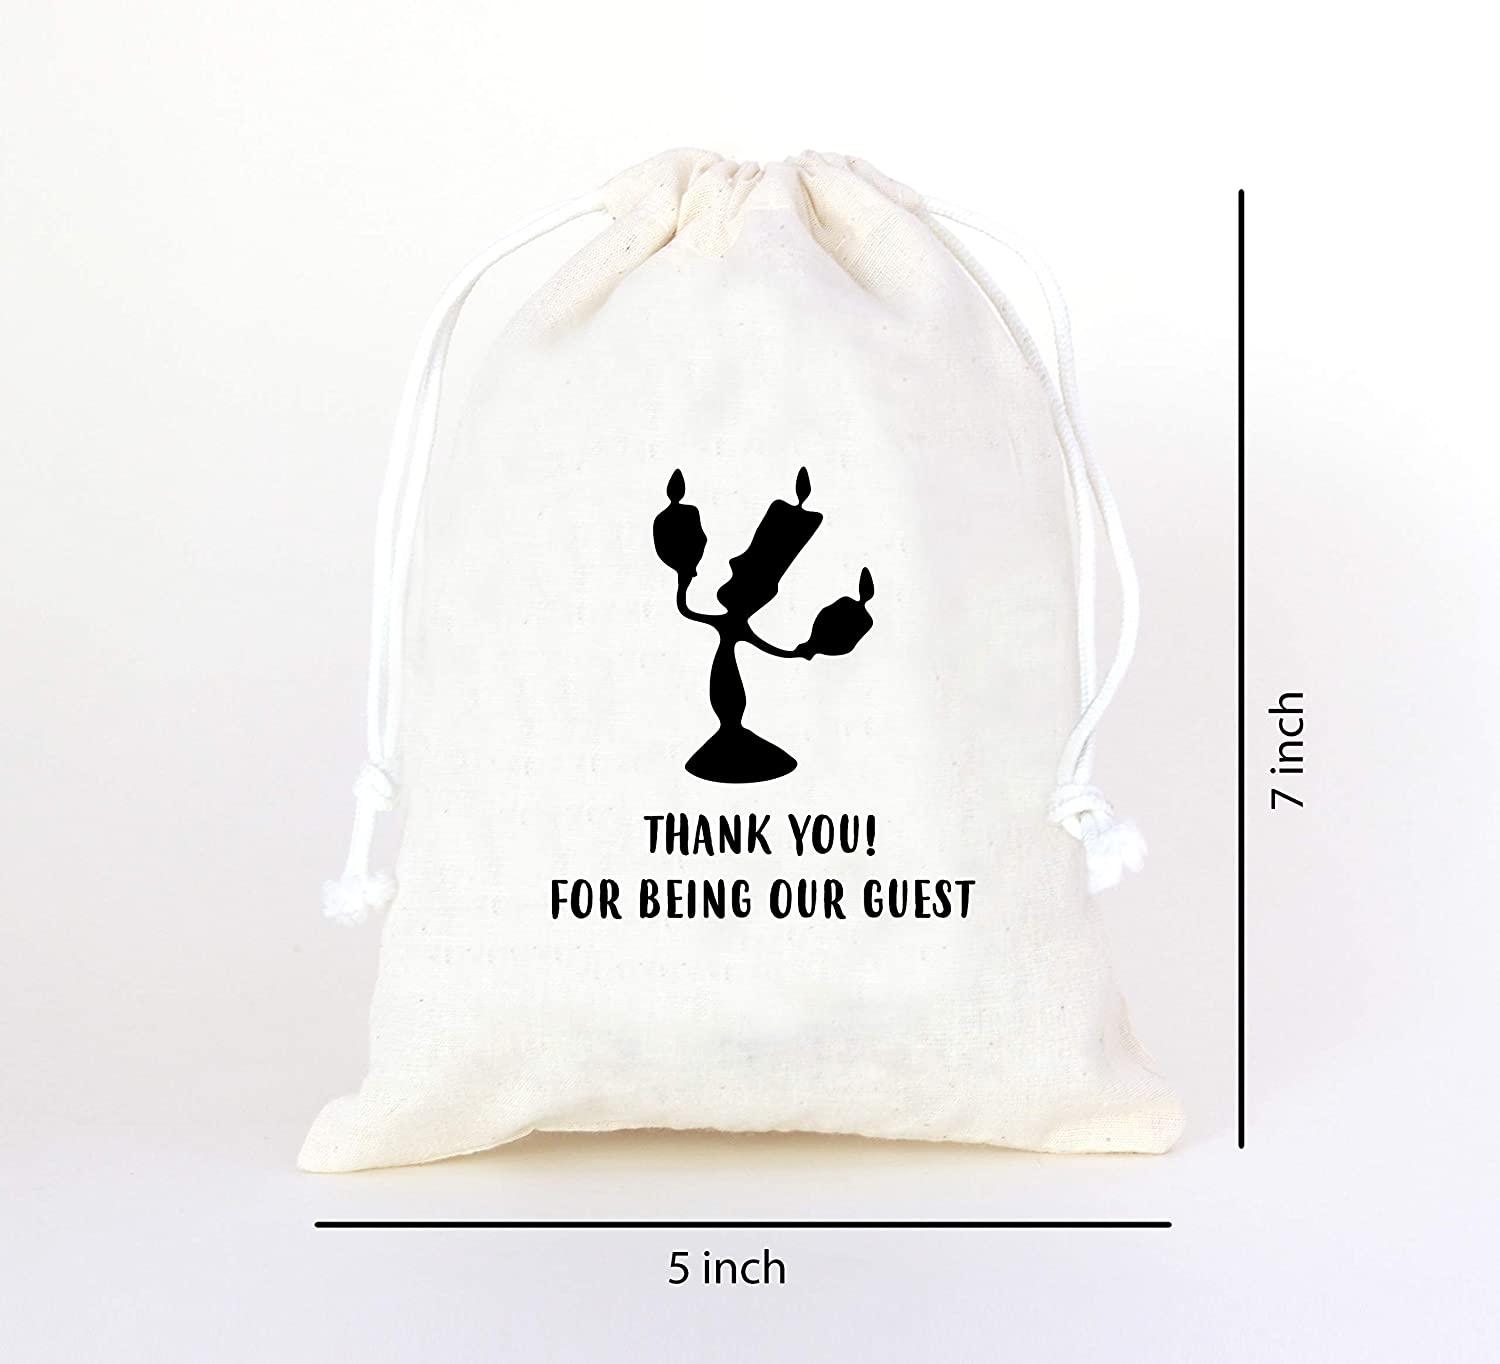 Thank You Tag Drawstring Bag Wedding Favors for Guests - Goodie Bags for  Kids Birthday Bridesmaid Graduation